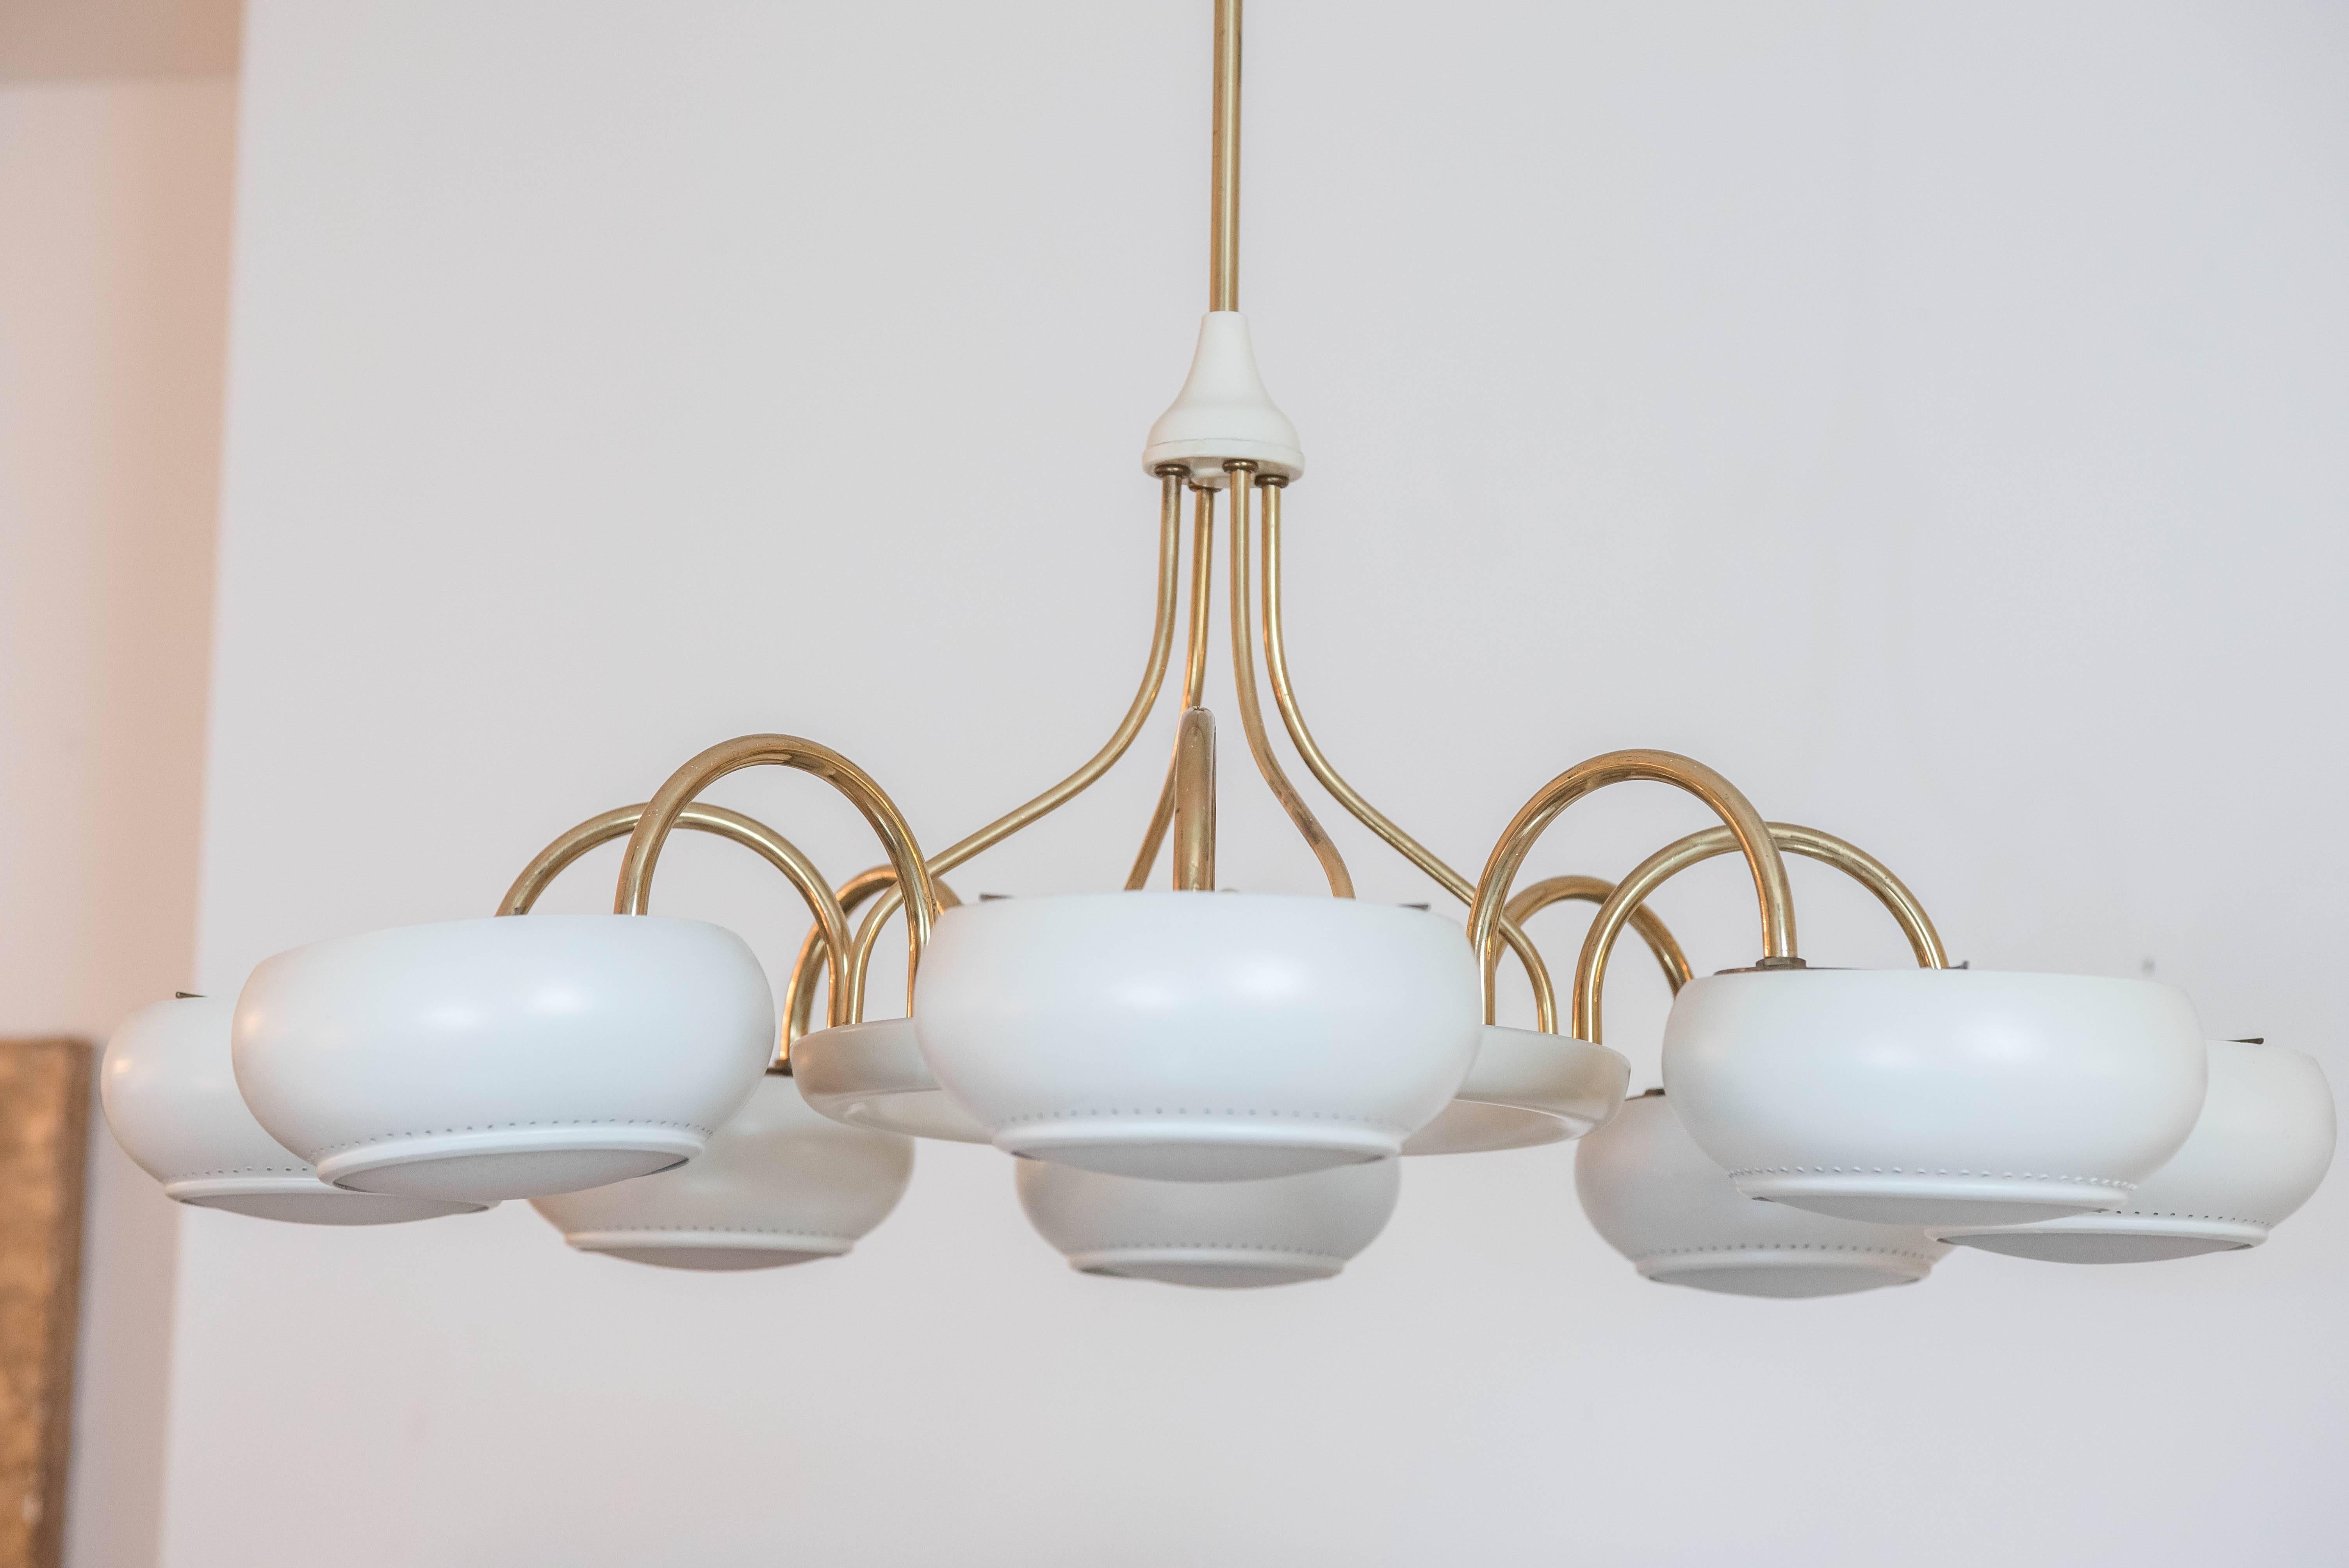 An elegant brass and white painted light fixture after prominent designer Paavo Tynell. The light is in good working order with original perforated glass shades.